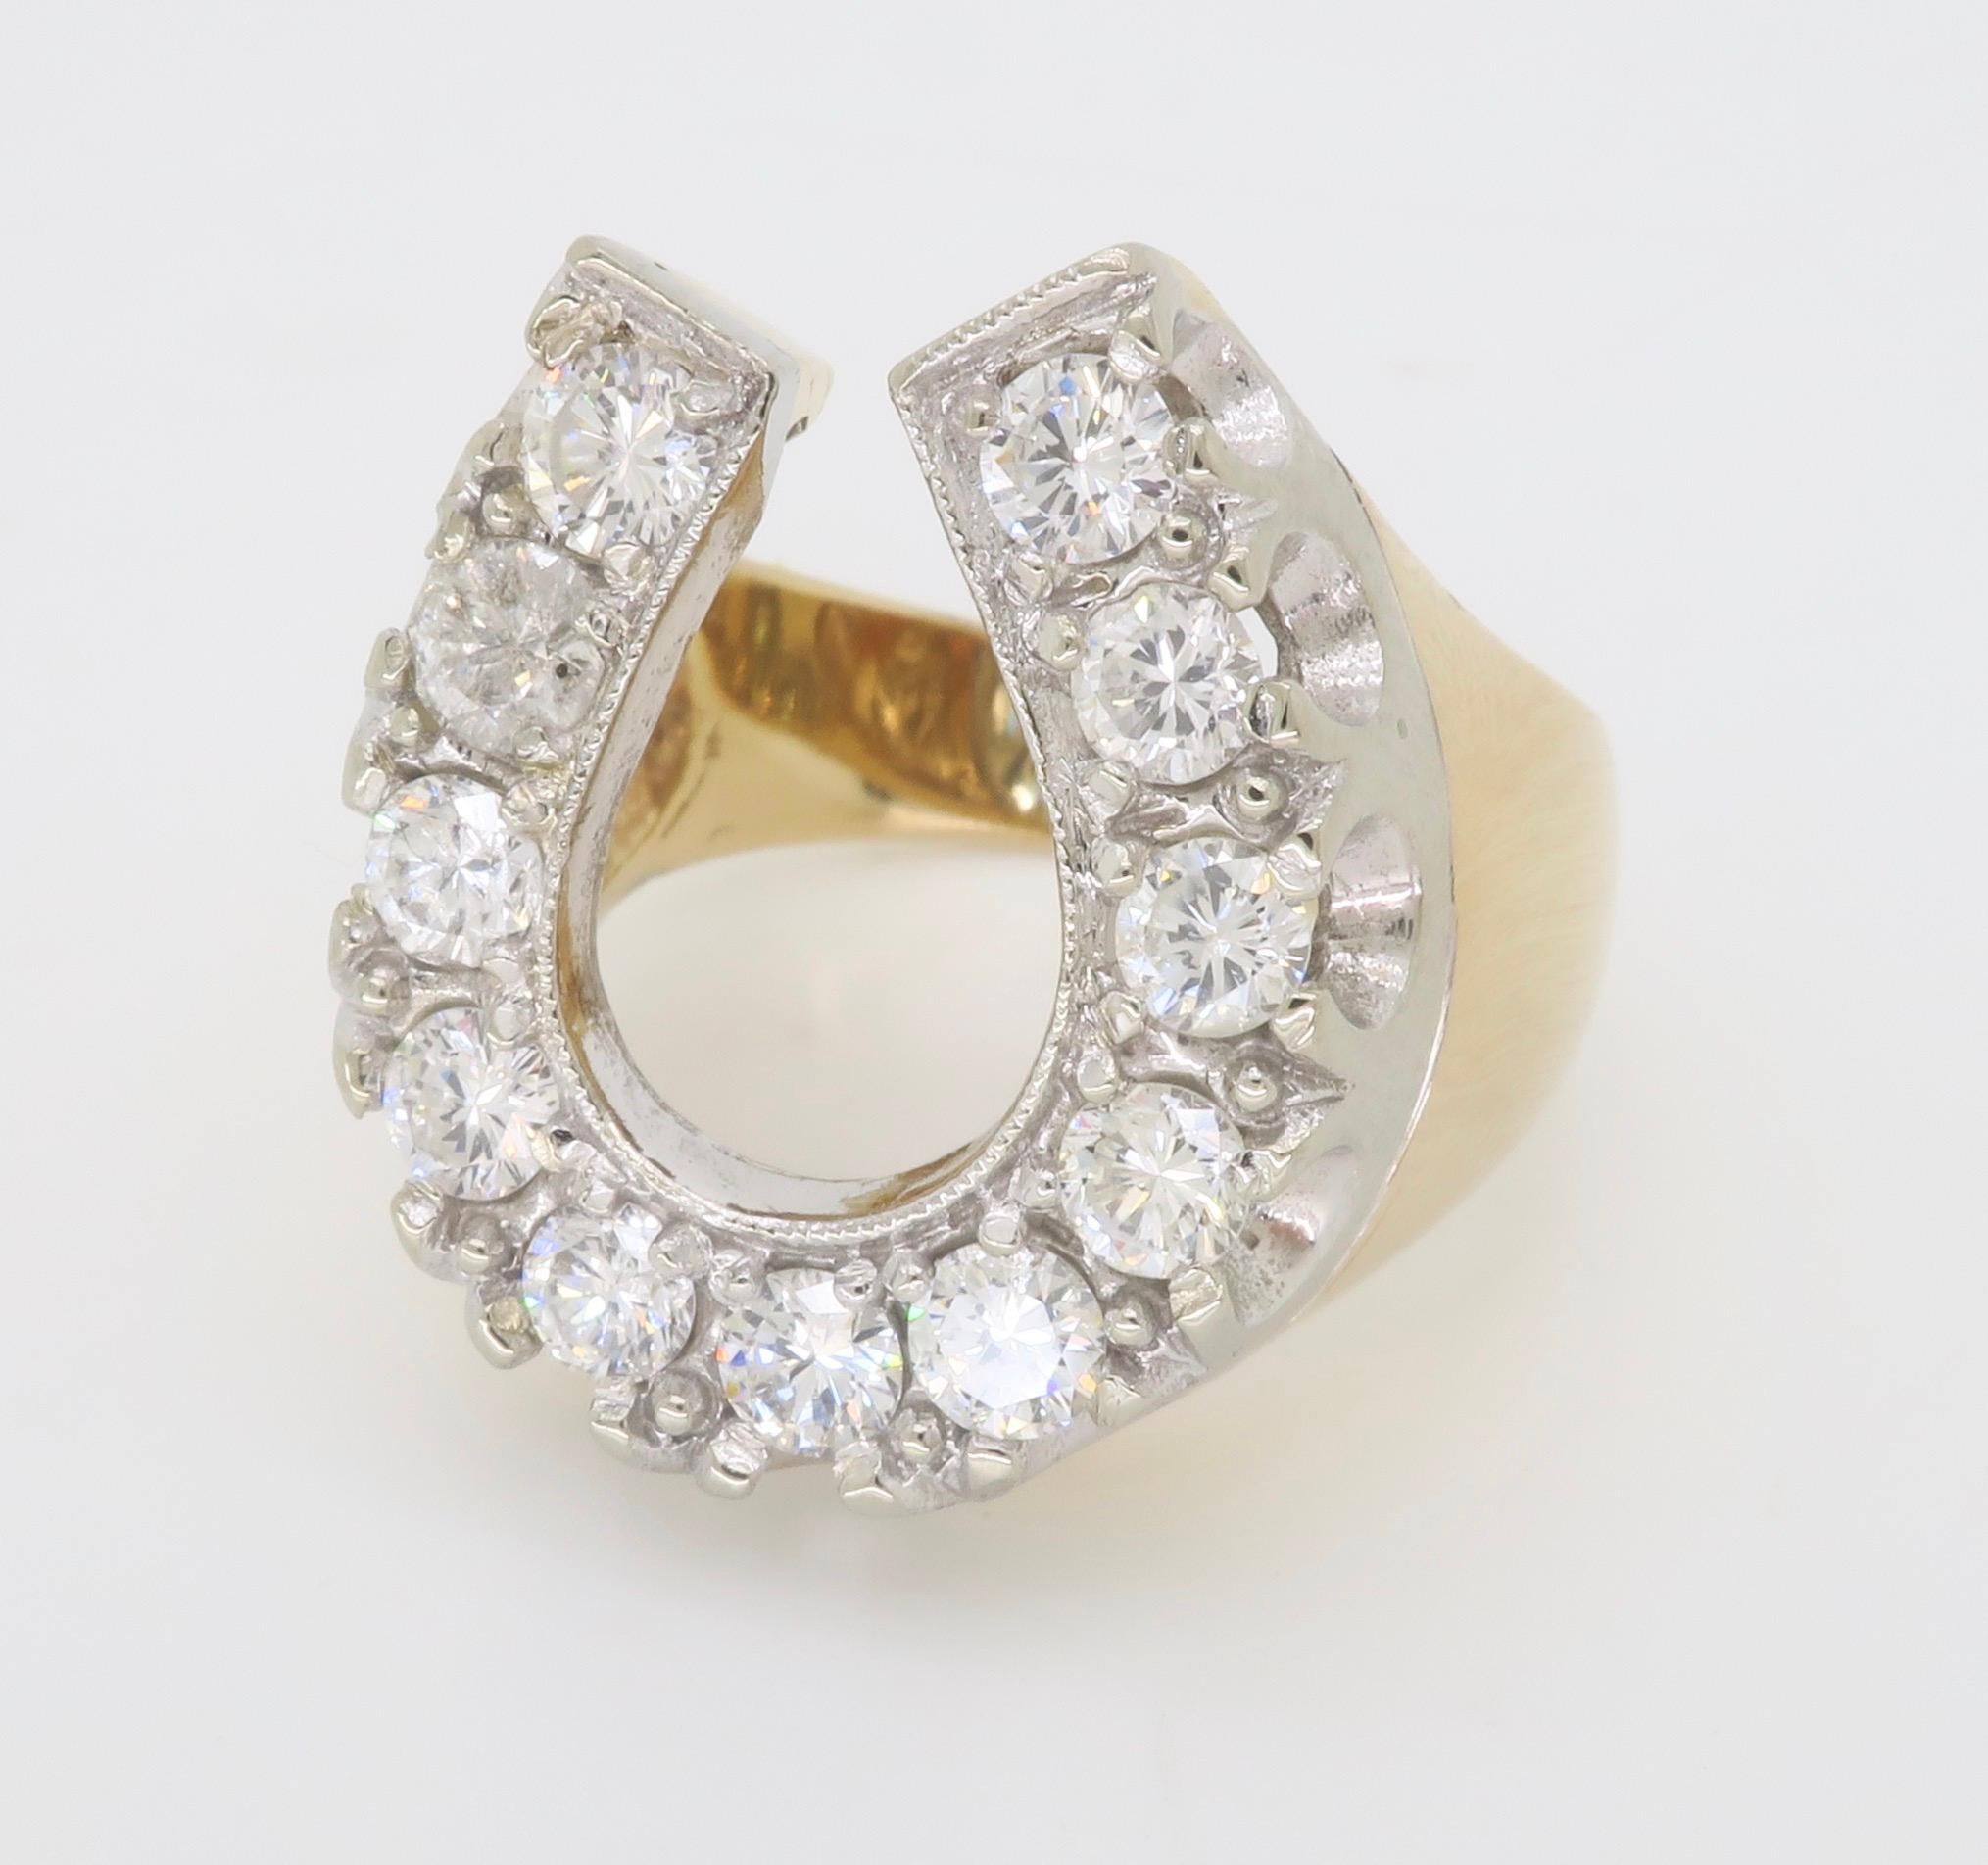 Unique Diamond Horseshoe Ring in Two-Tone Gold In Excellent Condition For Sale In Webster, NY